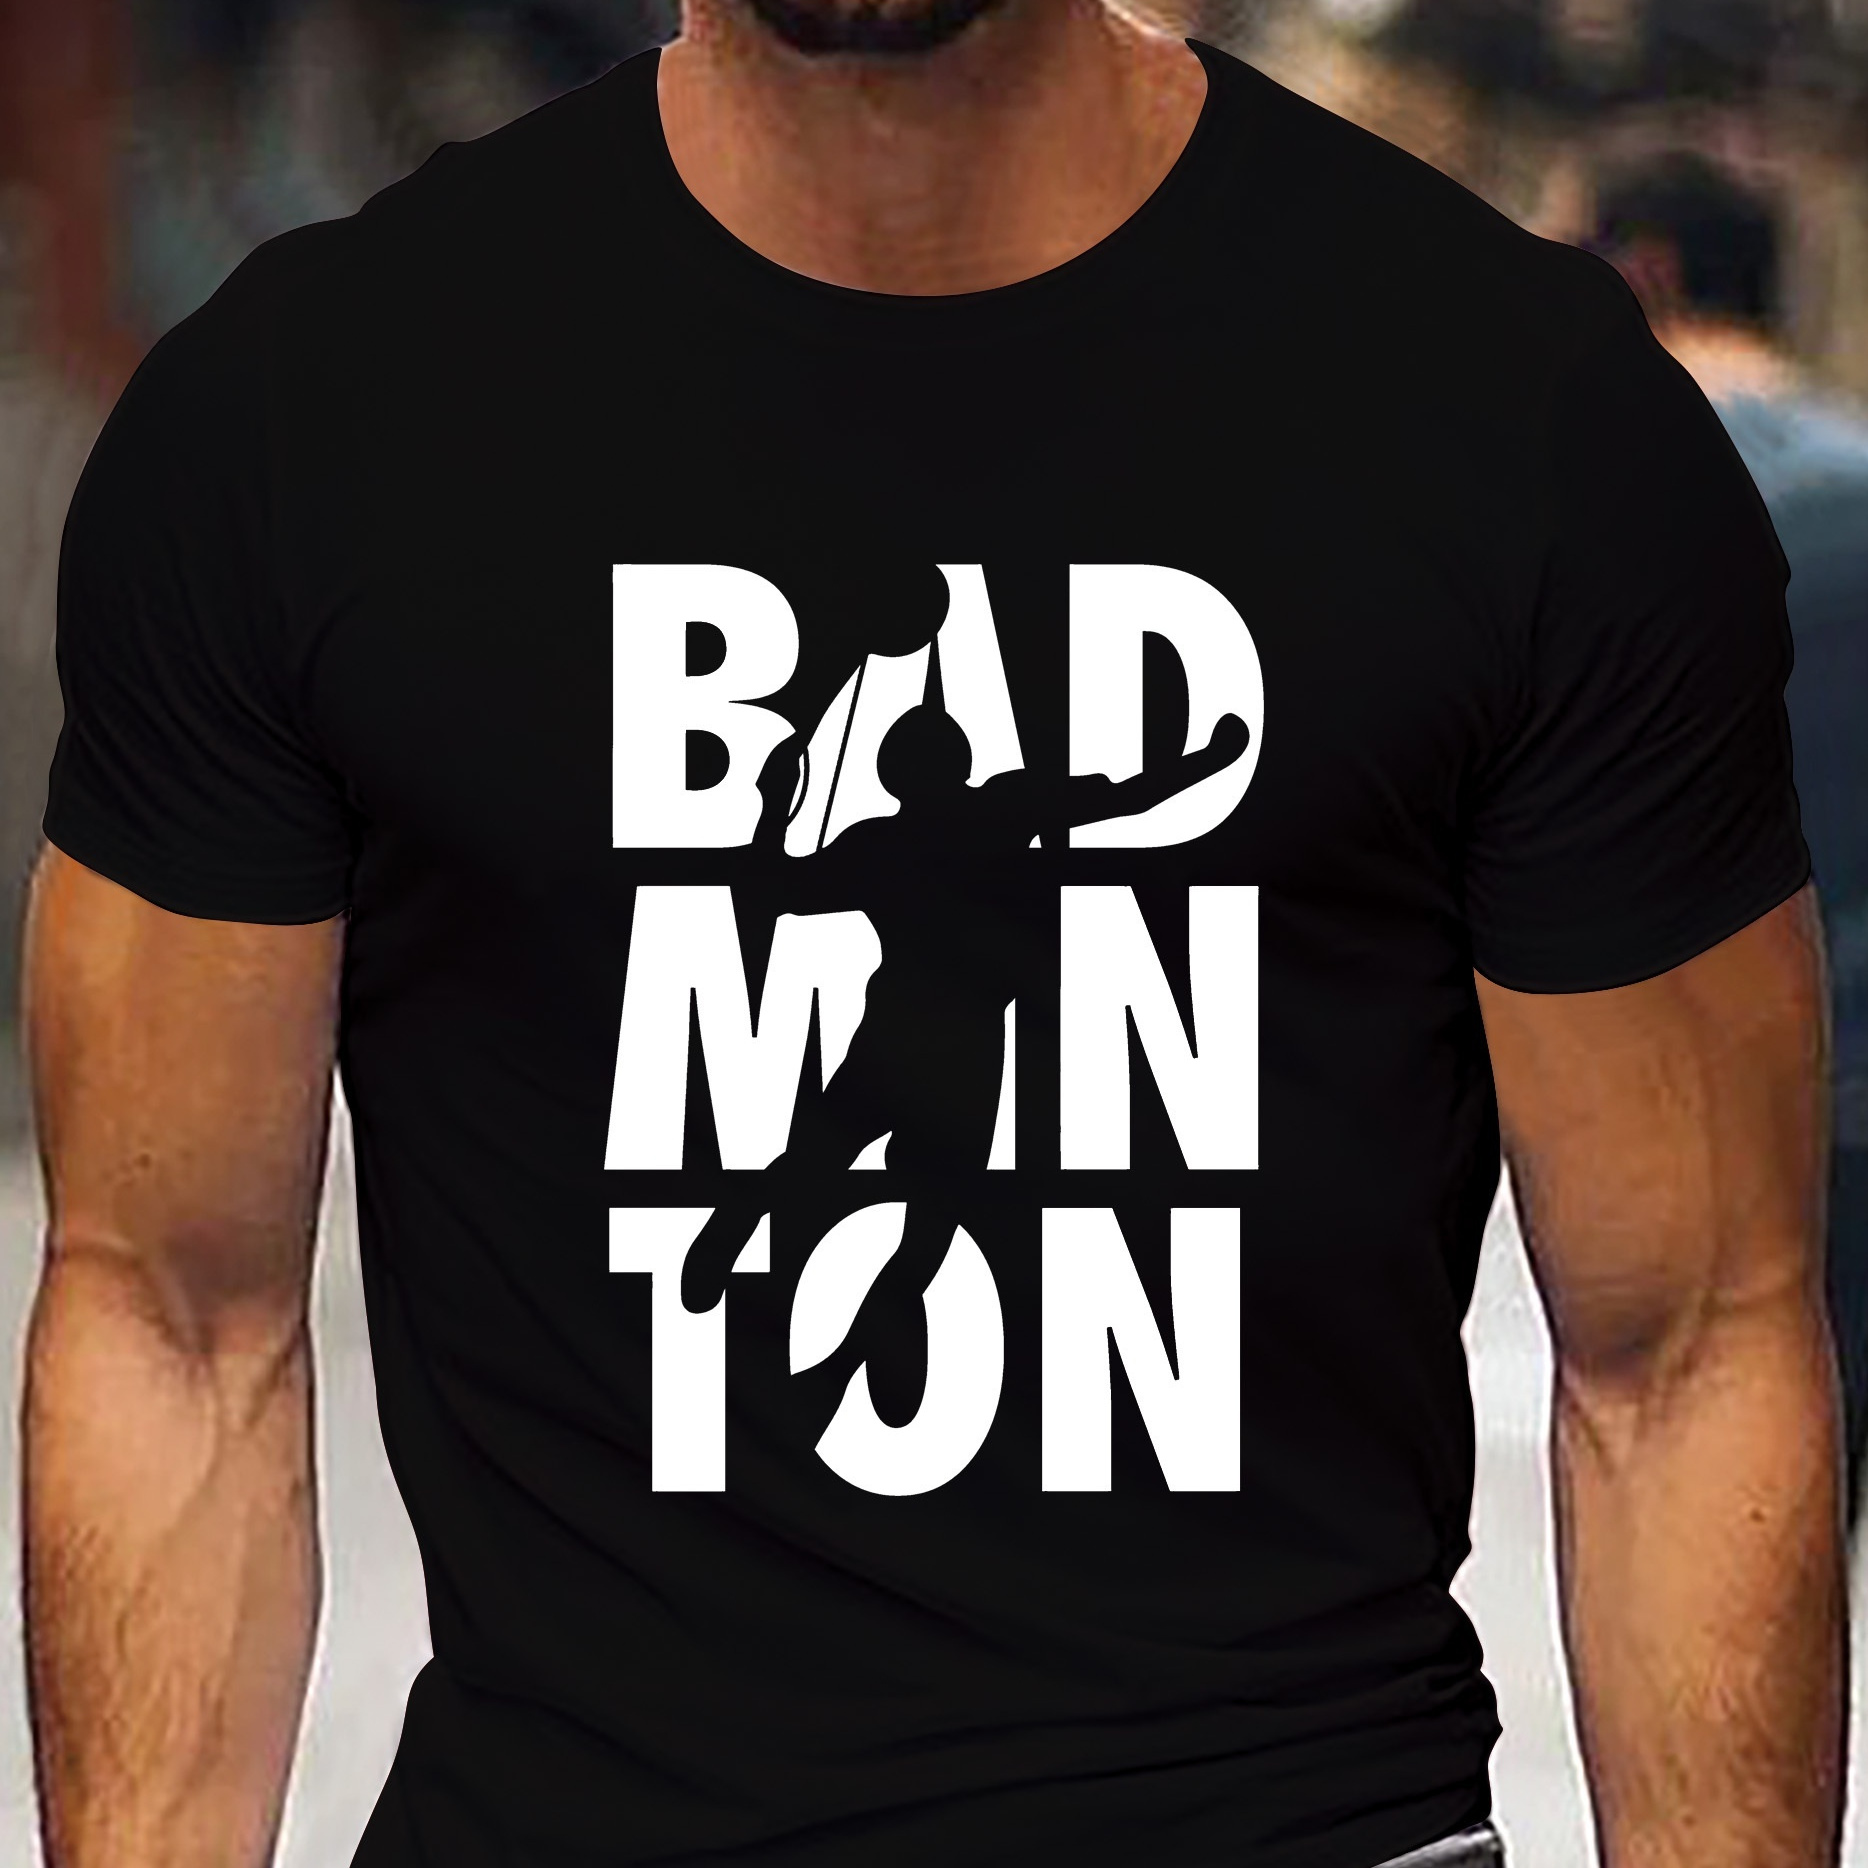 

Badminton Letter Graphic Print Men's Creative Top, Casual Short Sleeve Crew Neck T-shirt, Men's Clothing For Summer Outdoor